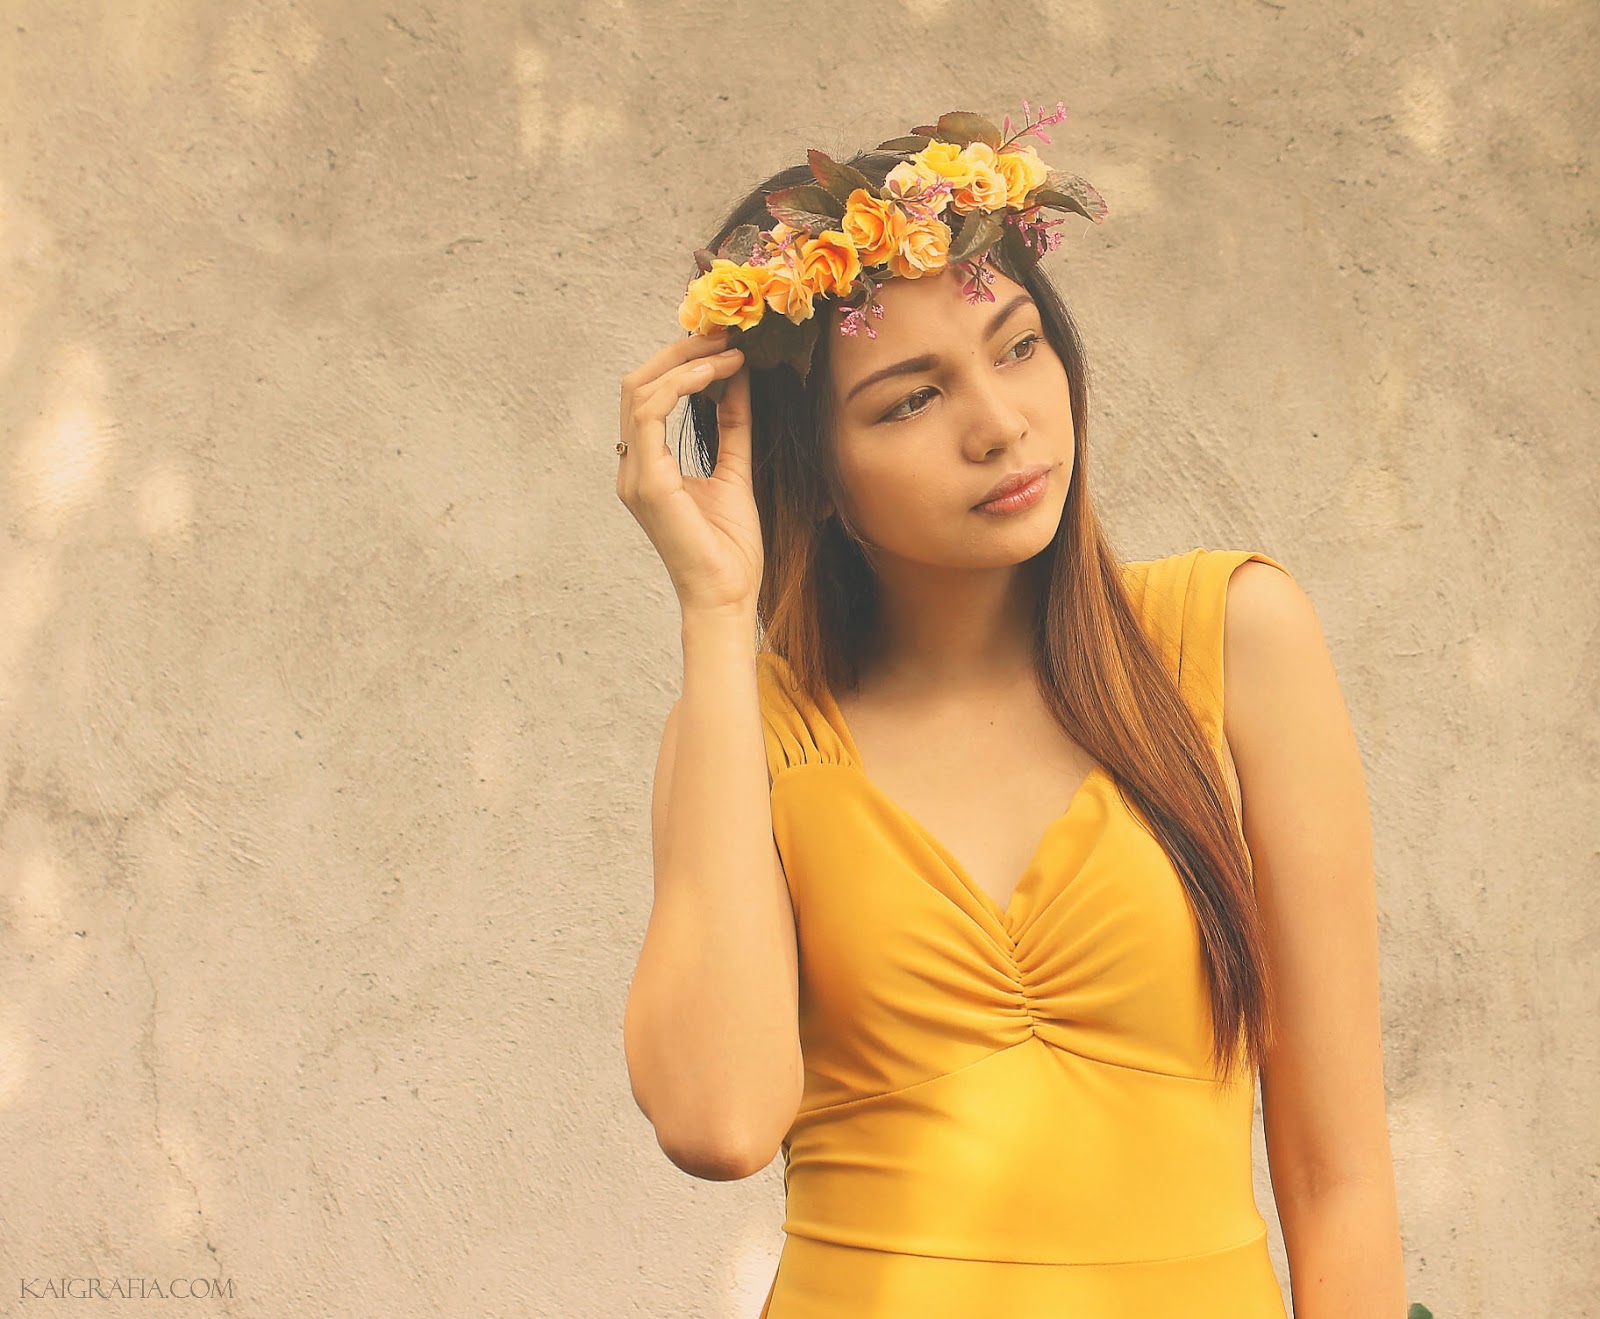 how to wear yellow dress and flower crowns